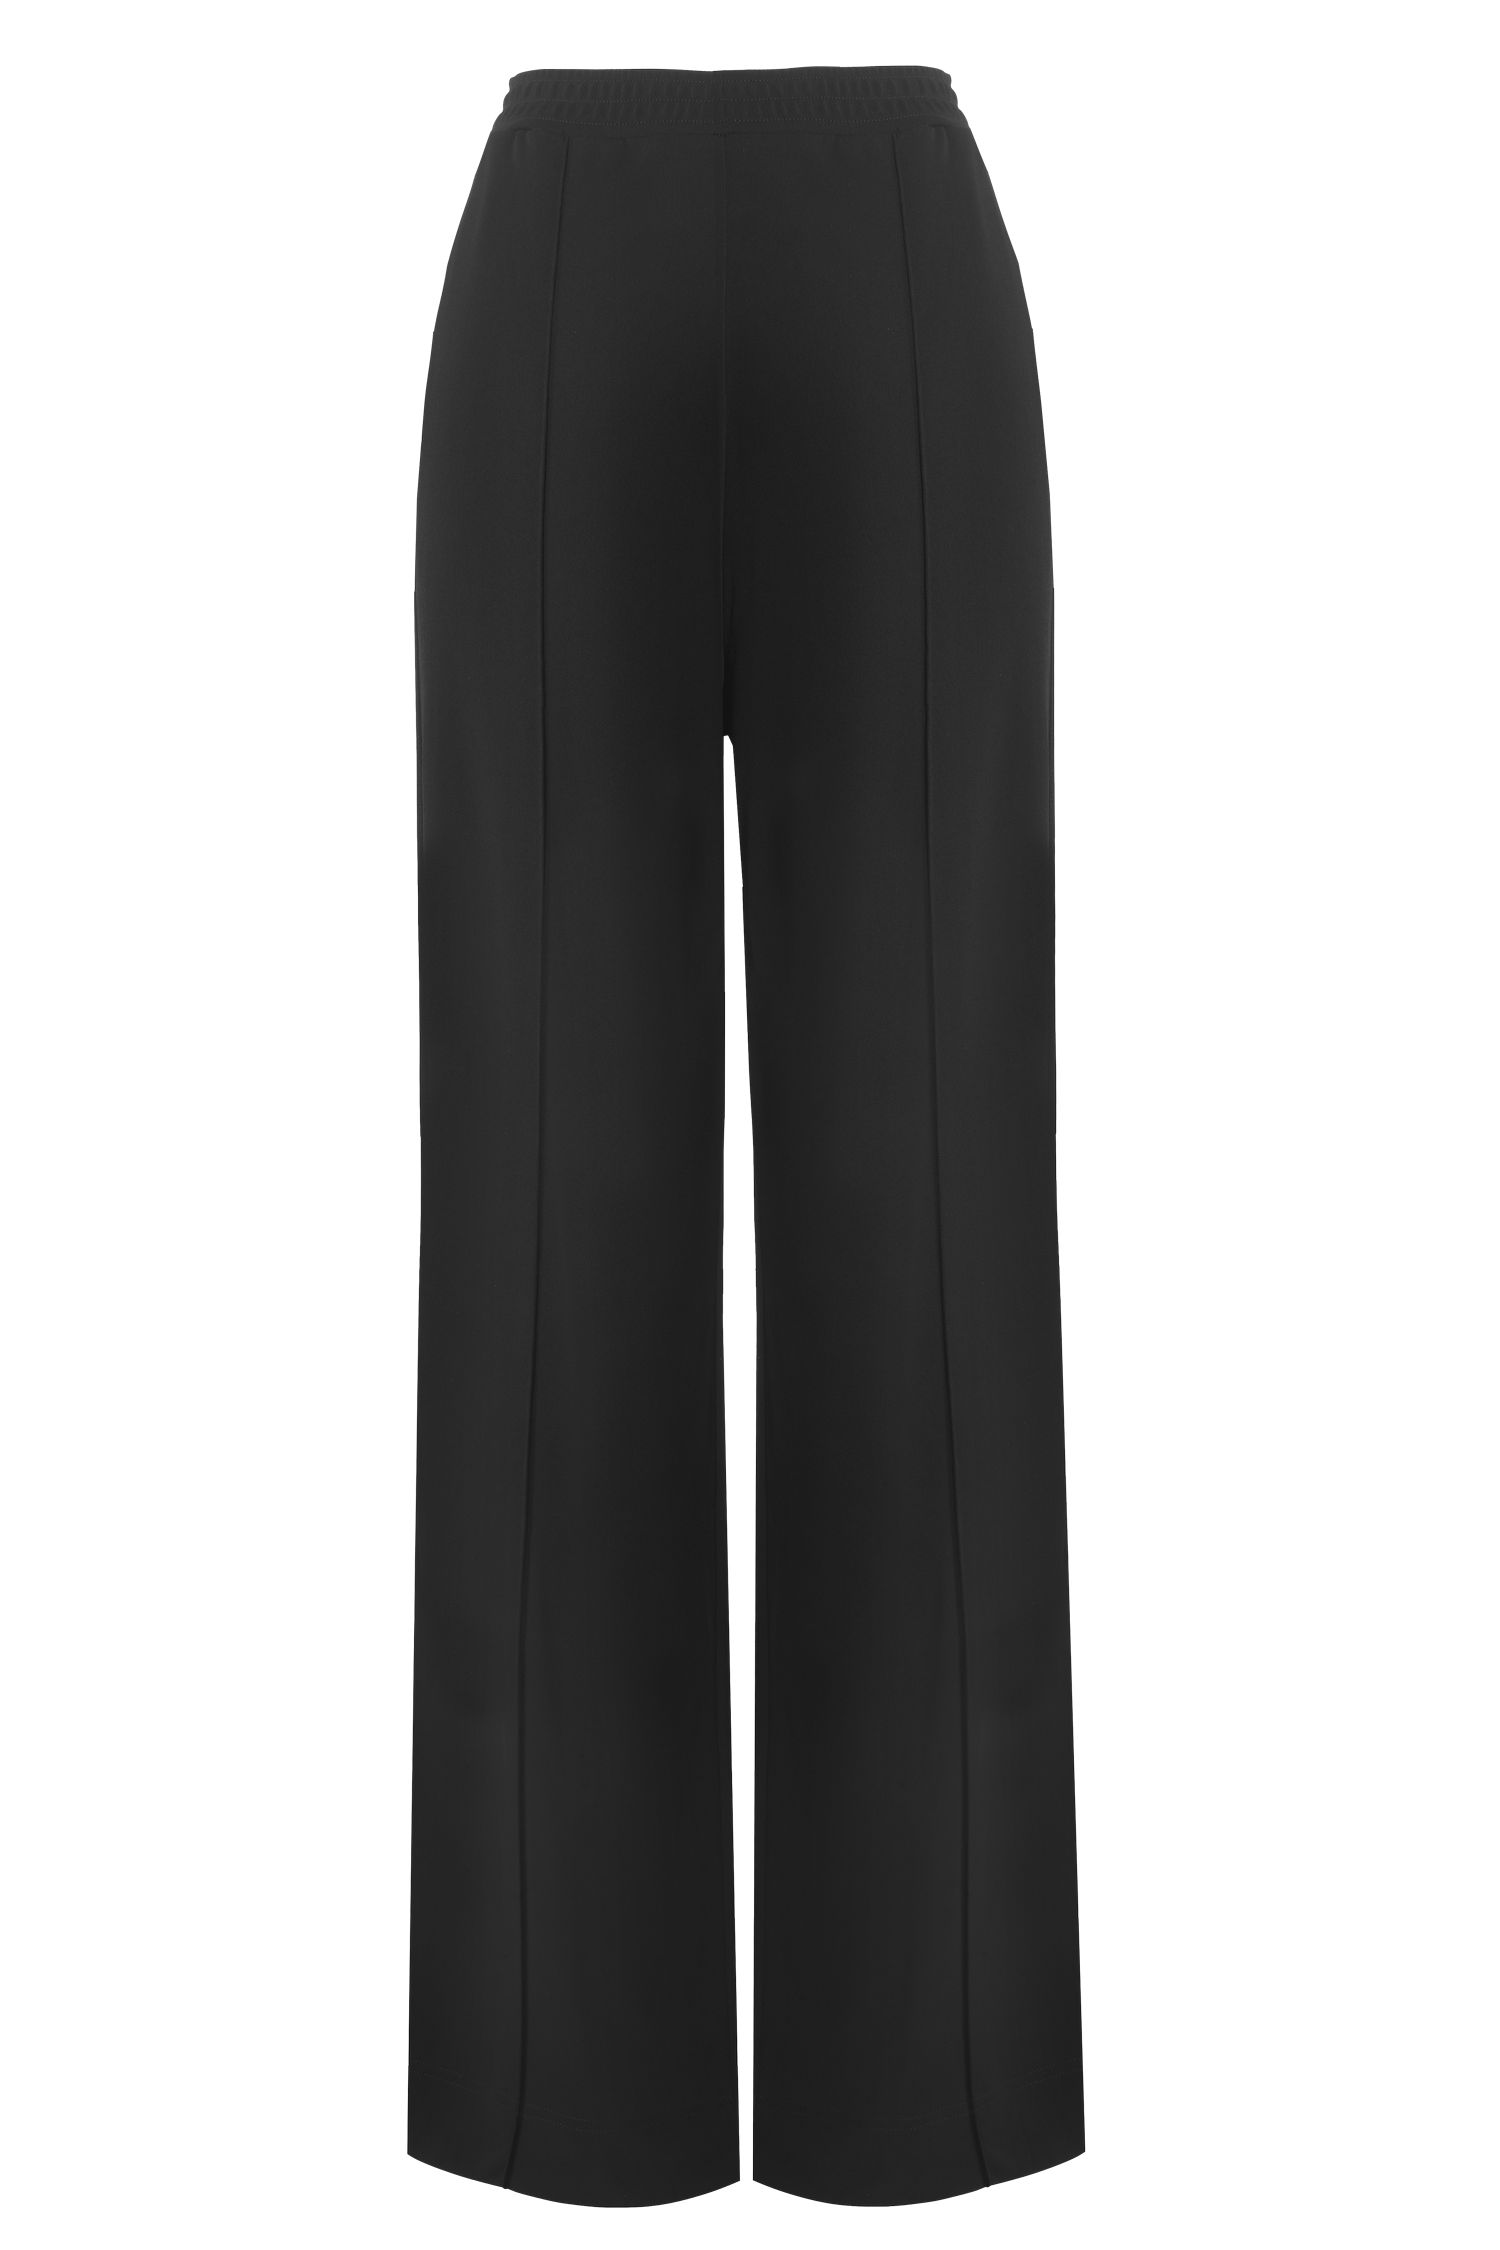 High Waisted Center Creased SuitTrousers | fecd.org.ec